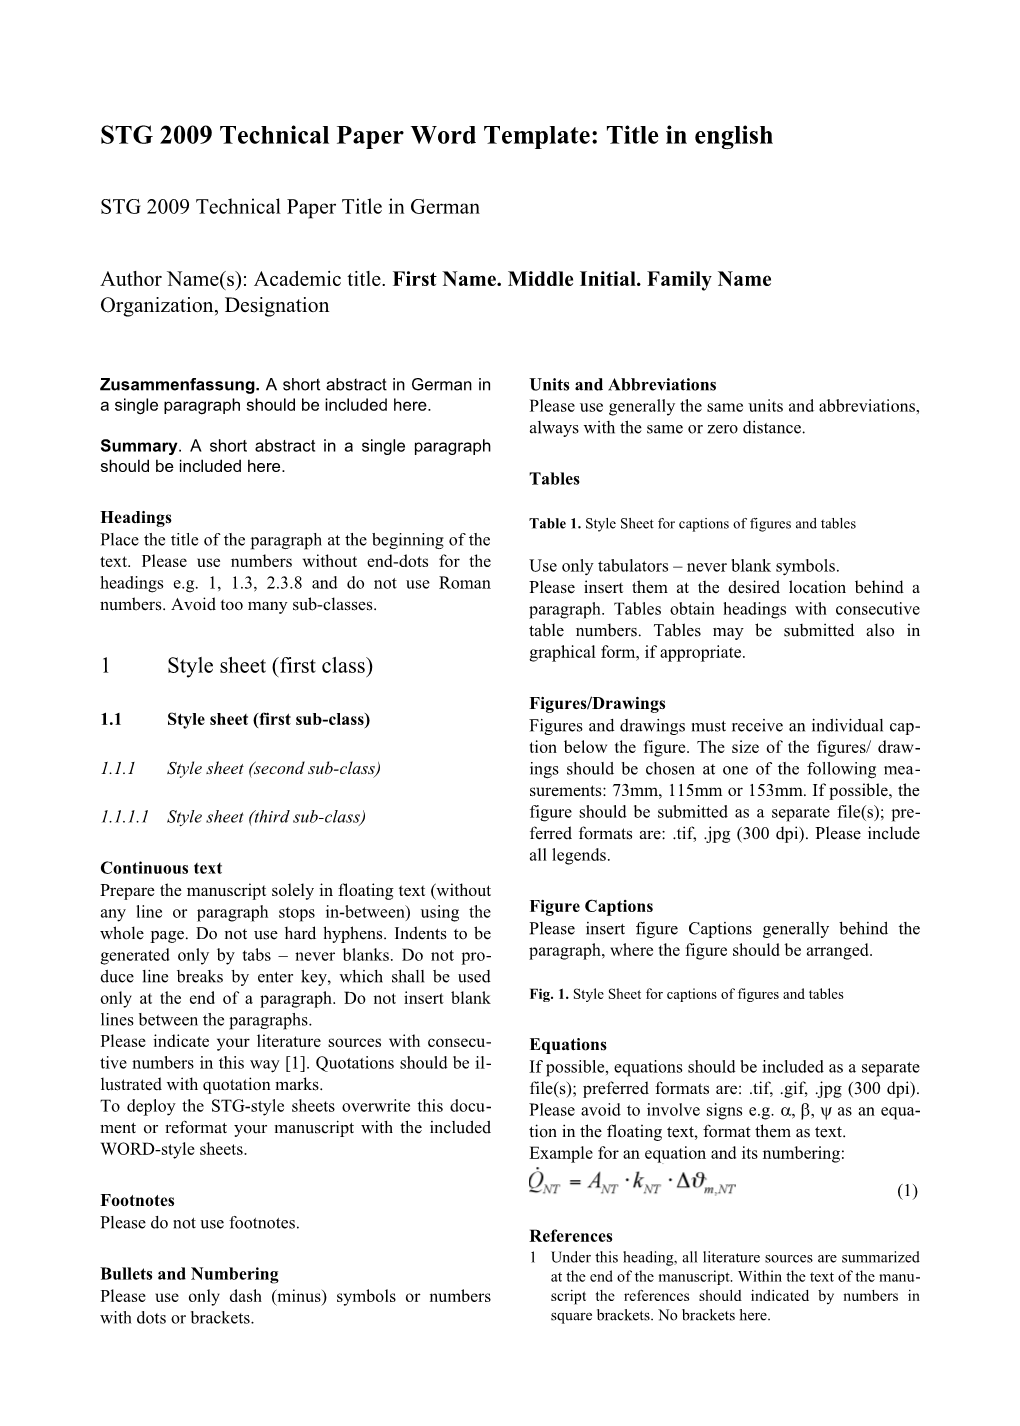 STG 2009 Technical Paper Word Template: Title in English